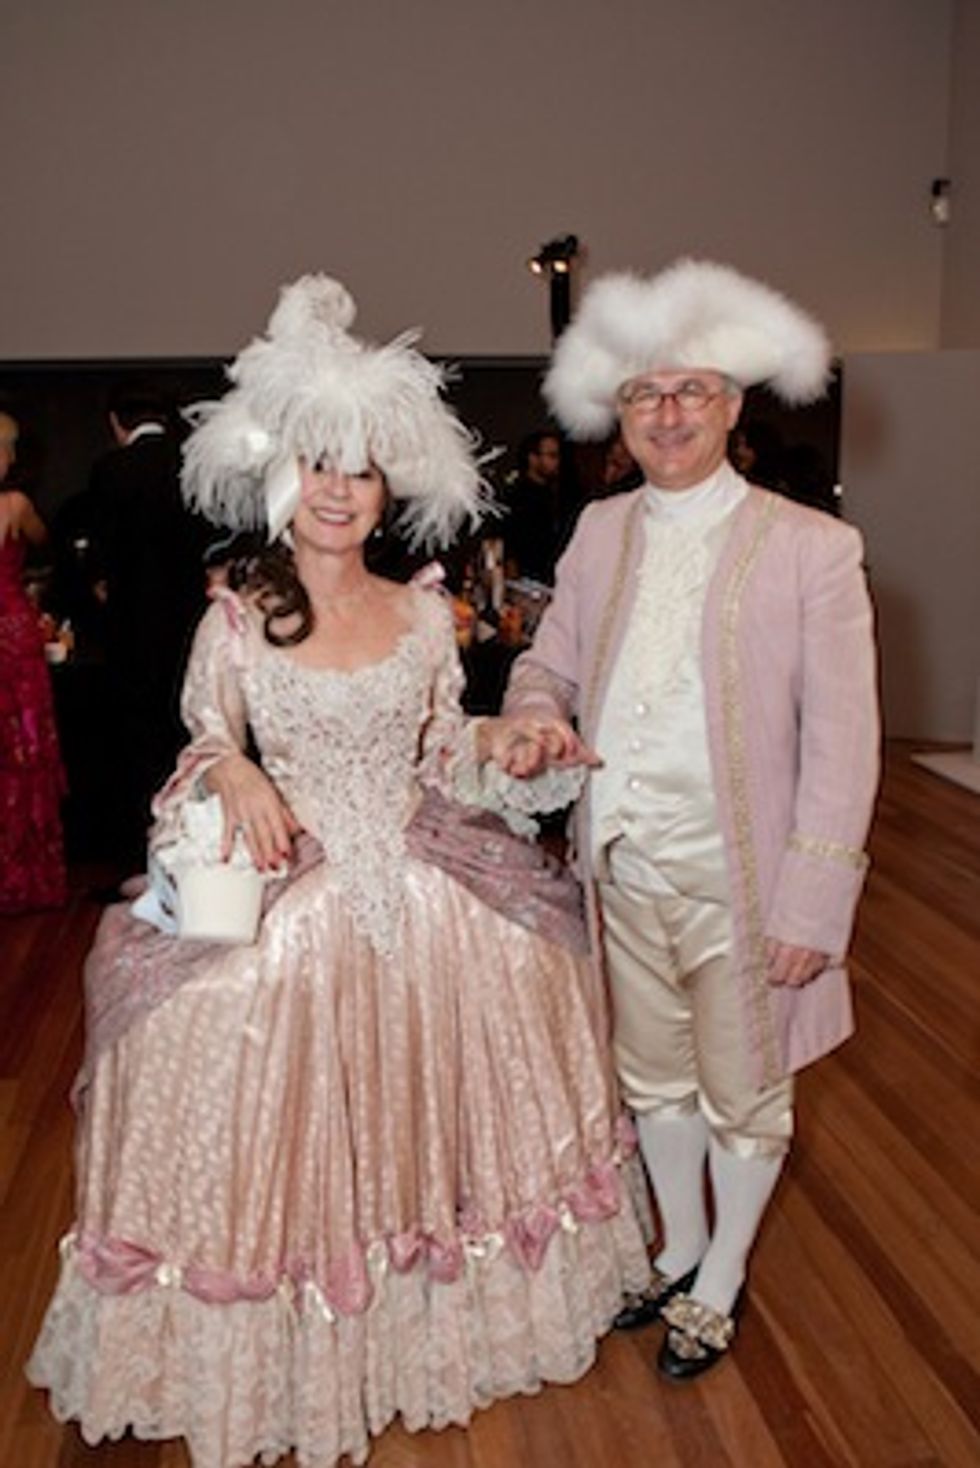 Photos: Artpoint's Masked Ball for the Masters of Venice at the de Young Museum